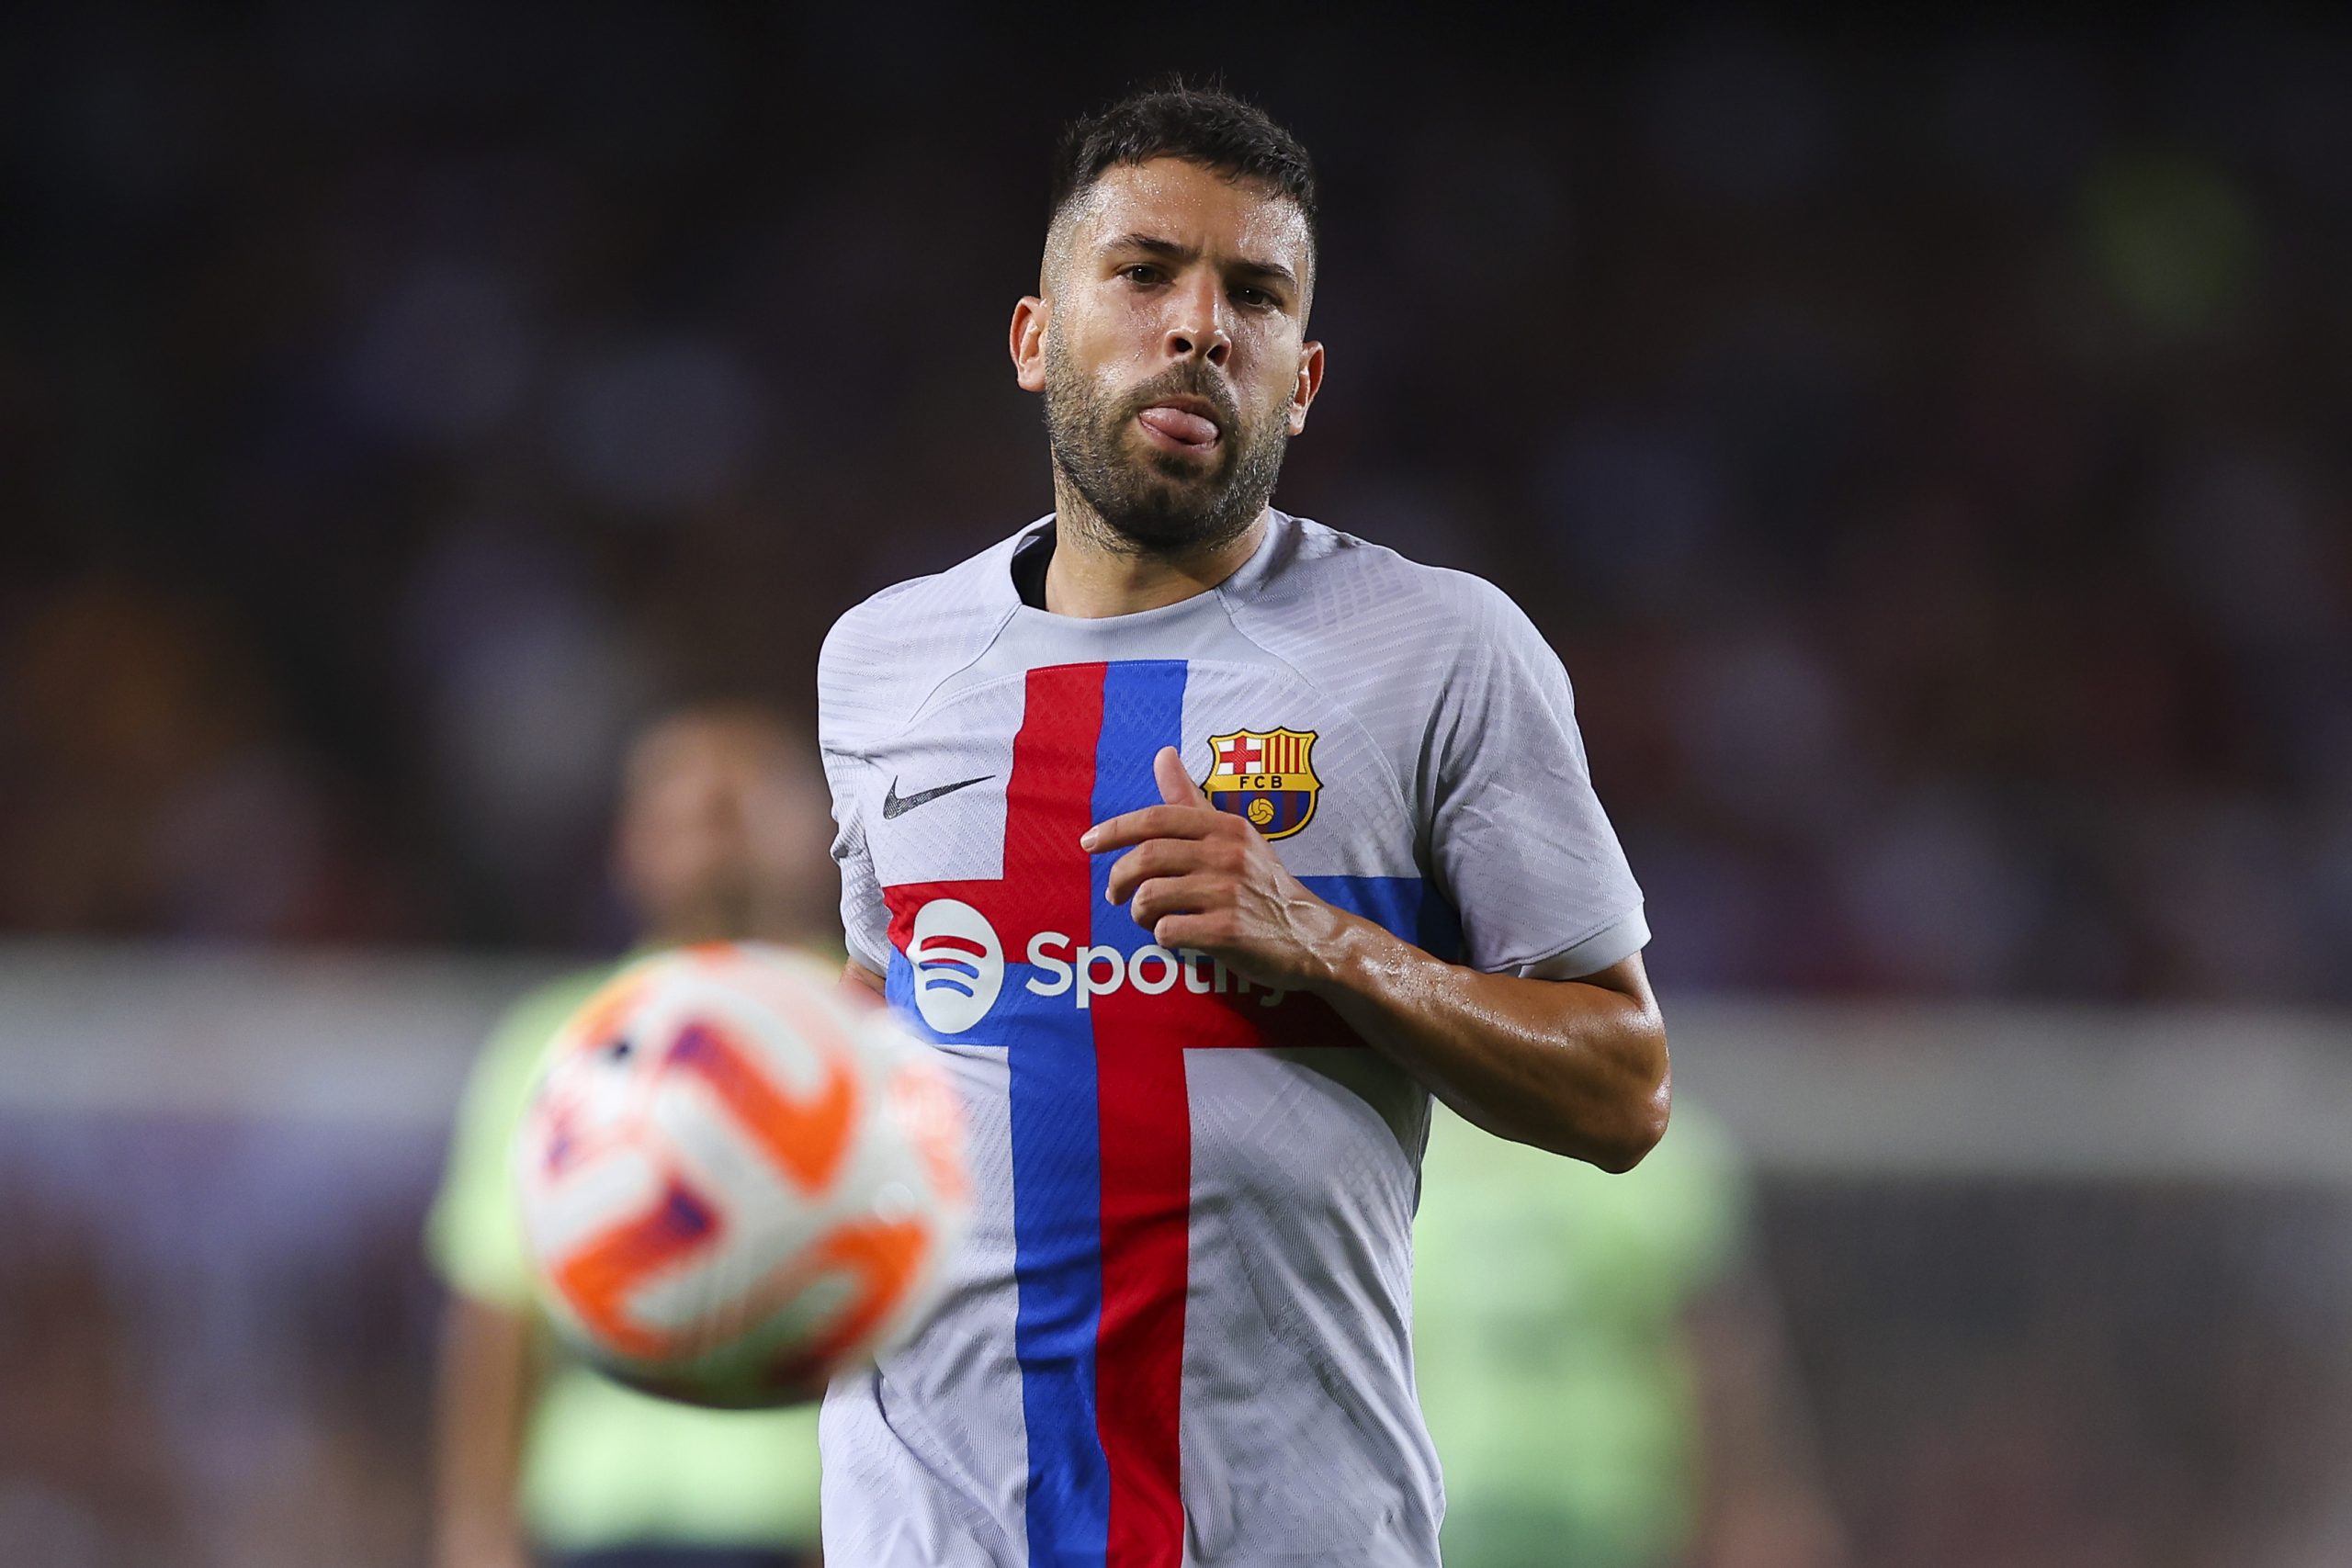 Barcelona’s Jordi Al  manchester united jersey cheap  ba linked with shock move to Inter